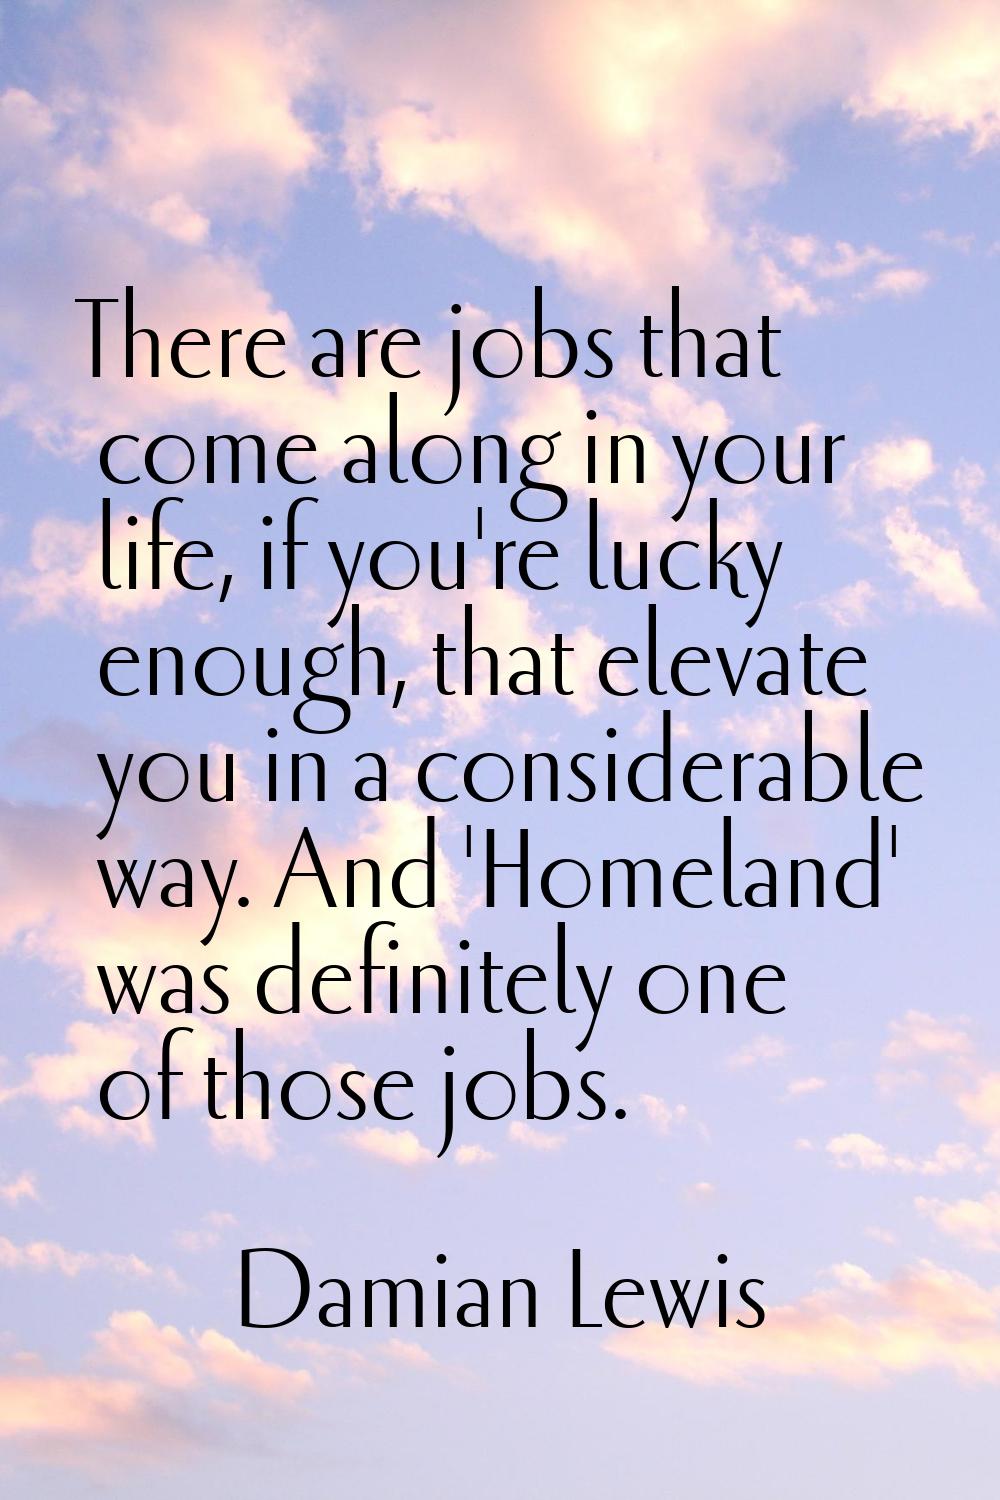 There are jobs that come along in your life, if you're lucky enough, that elevate you in a consider